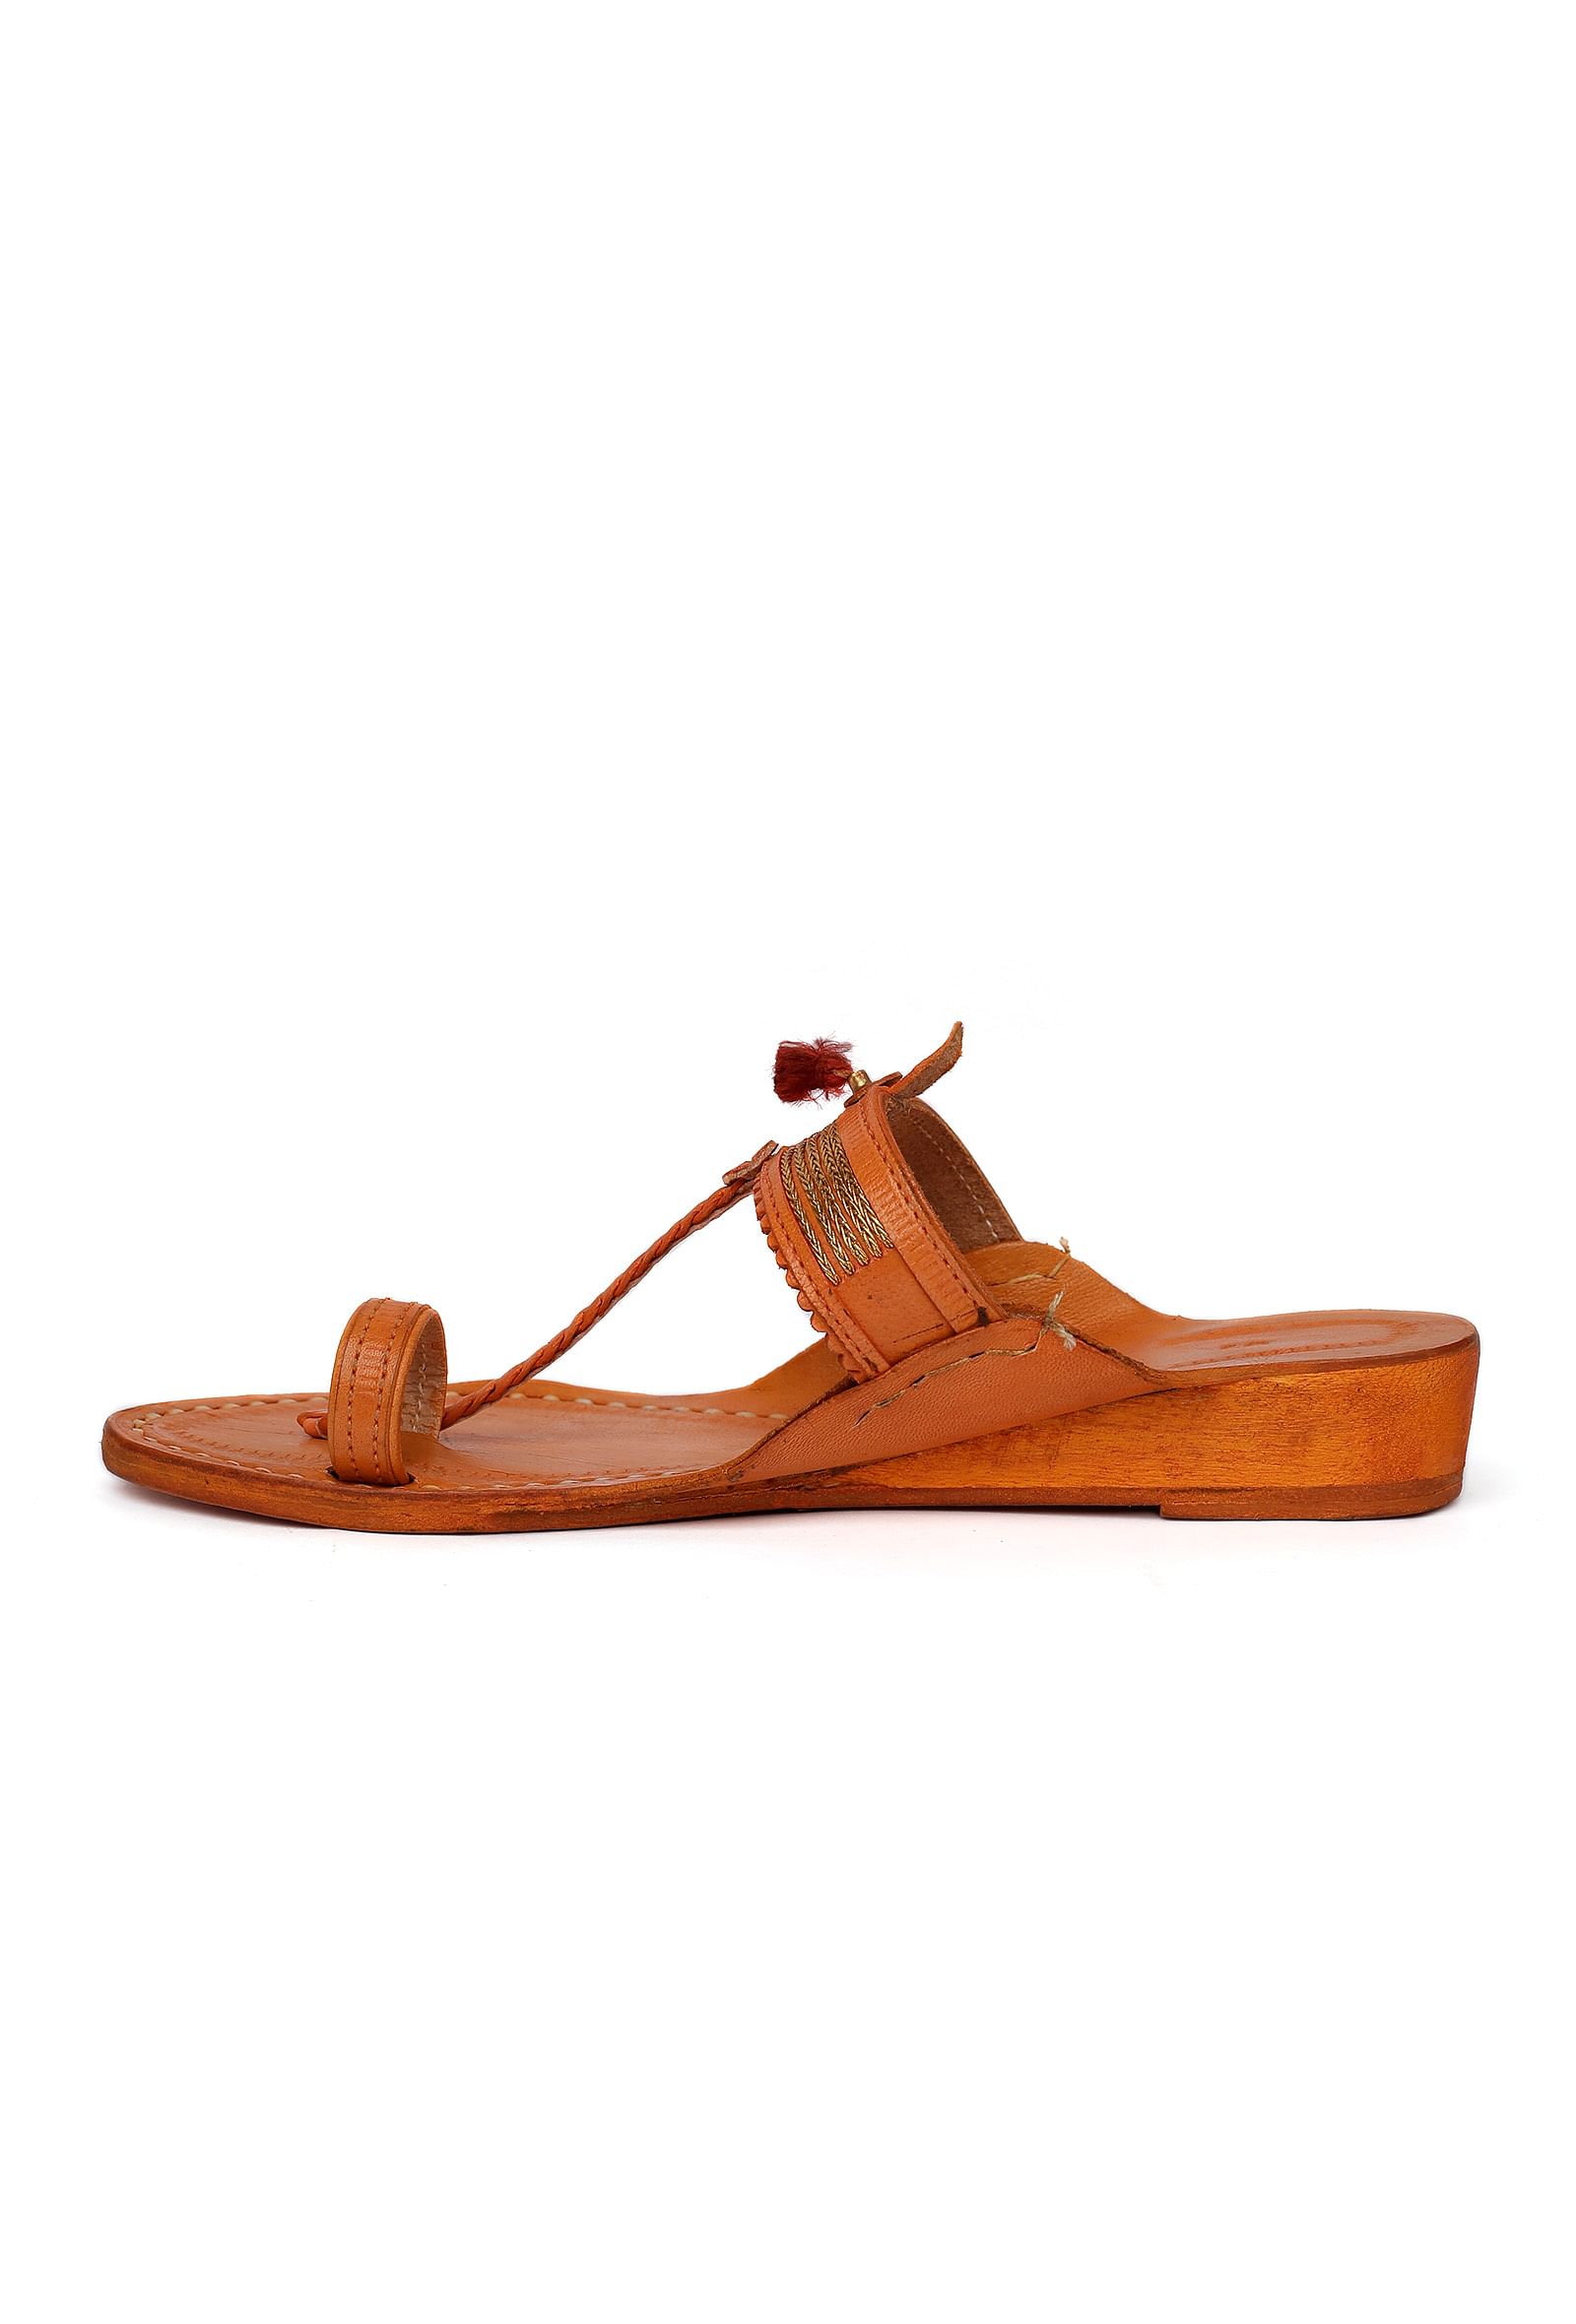 Light Brown Handcrafted Pure Leather Kolhapuri Flats  with Red Pom